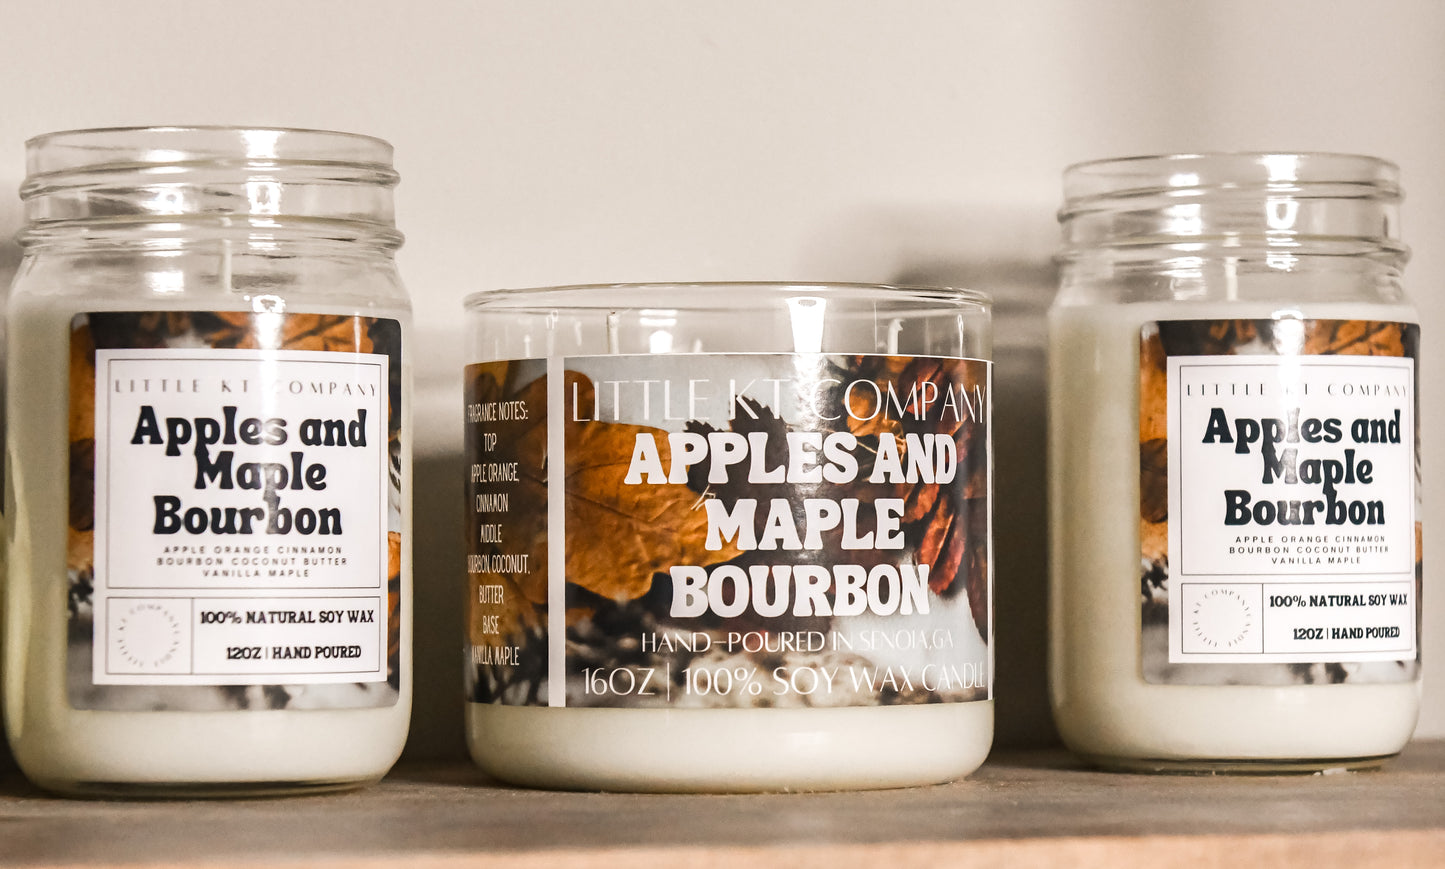 Apples and Maple Bourbon